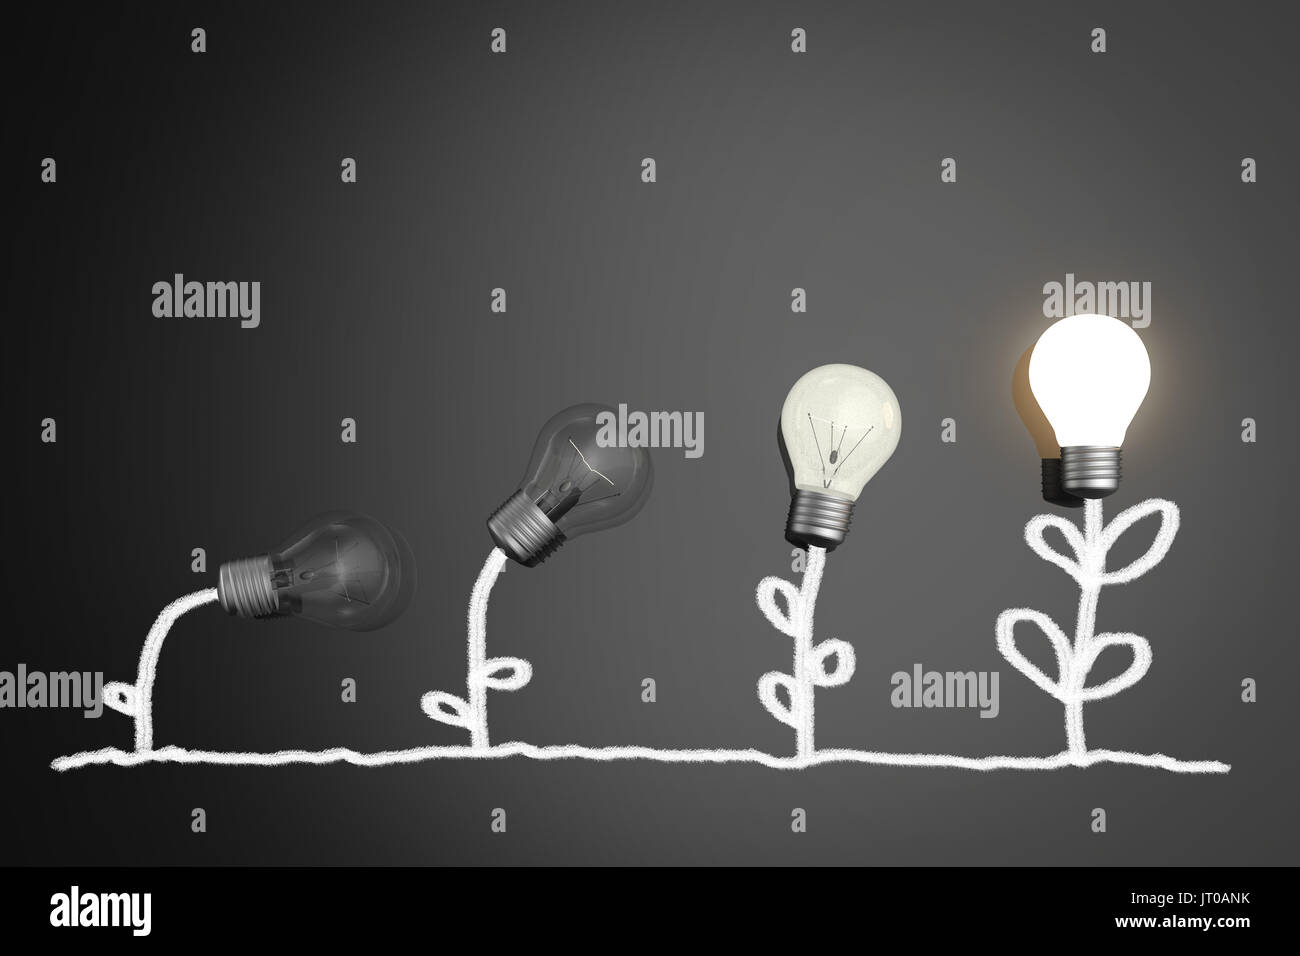 growing up concept with shining lightbulb and plants Stock Photo